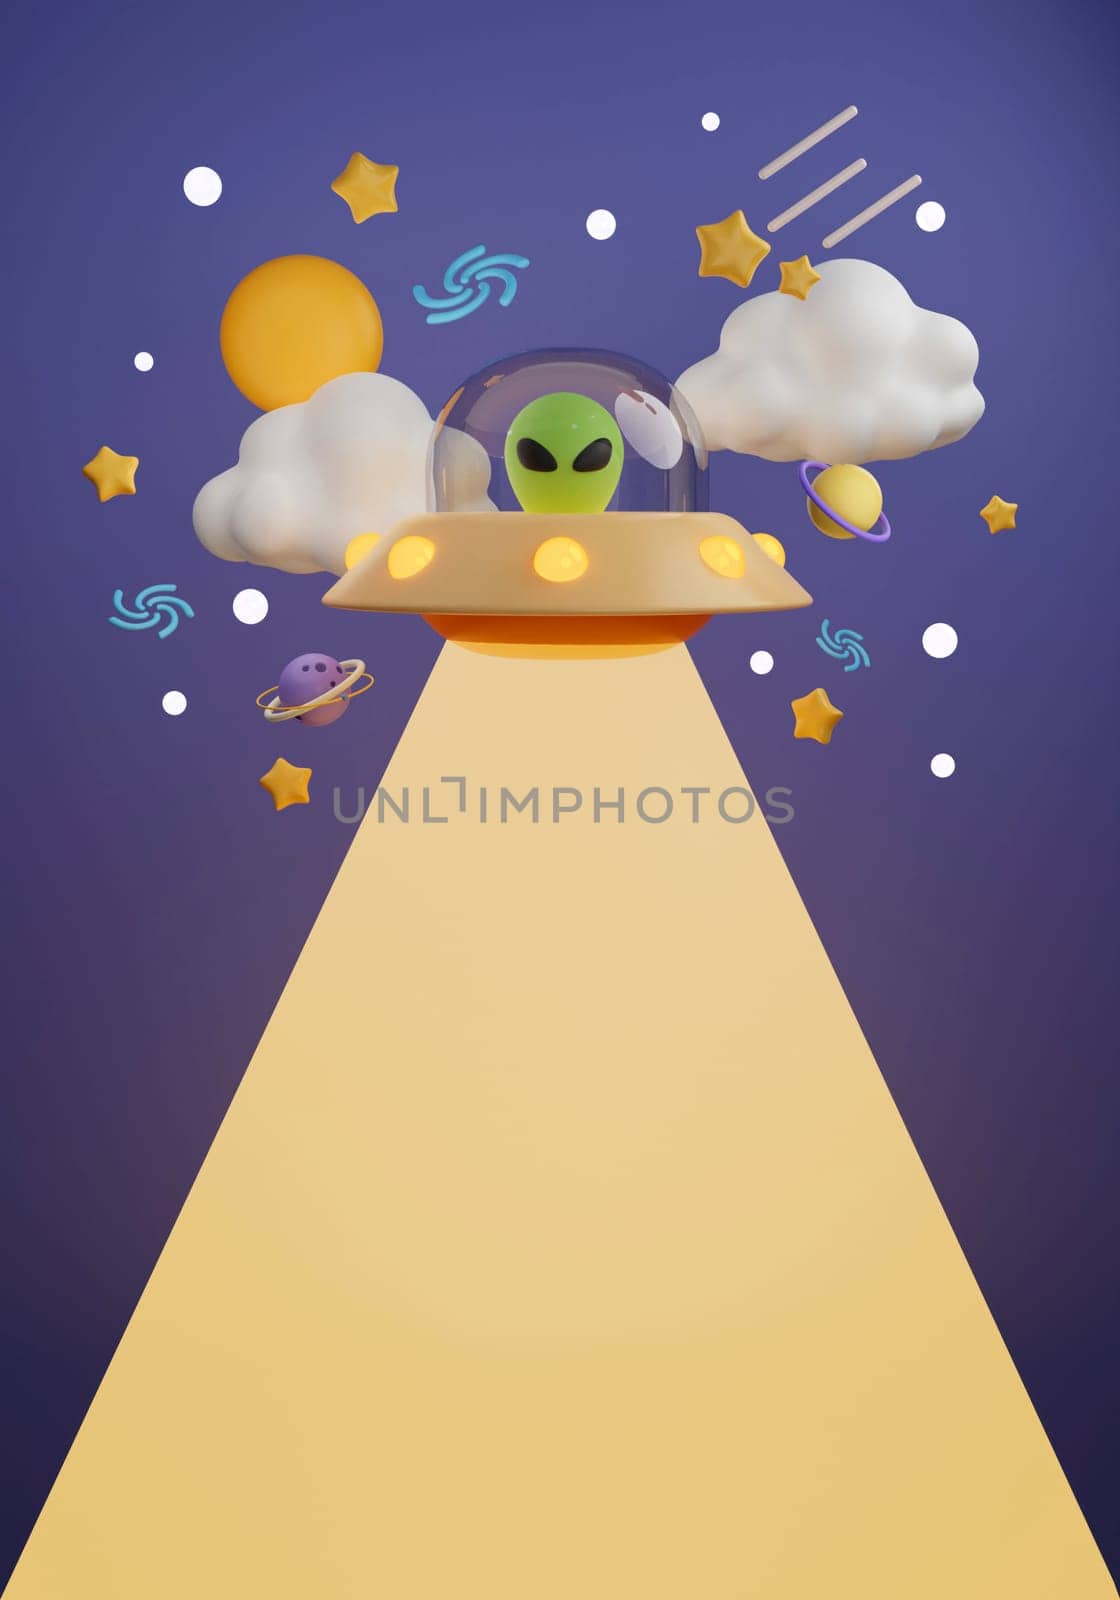 3d Creative cartoon space design with ufo alien with planets and space accessory on dark purple background. banner, 3d render illustration.